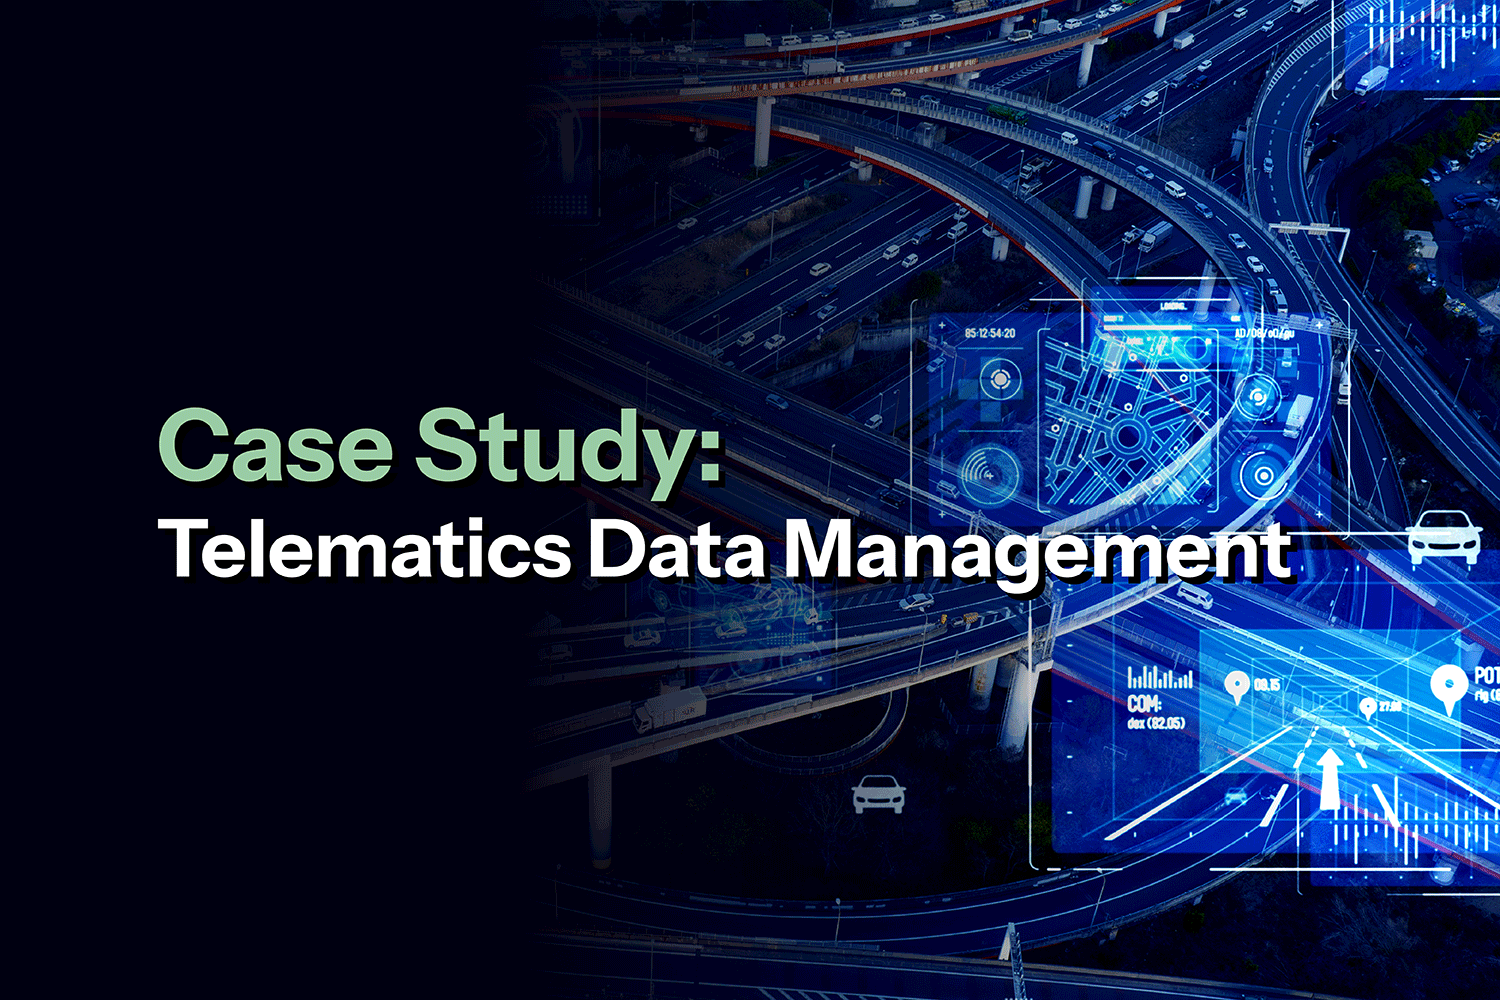 LSS-Knowledge-Center-Case-Study-Telematics Data Management-Card-Images-01